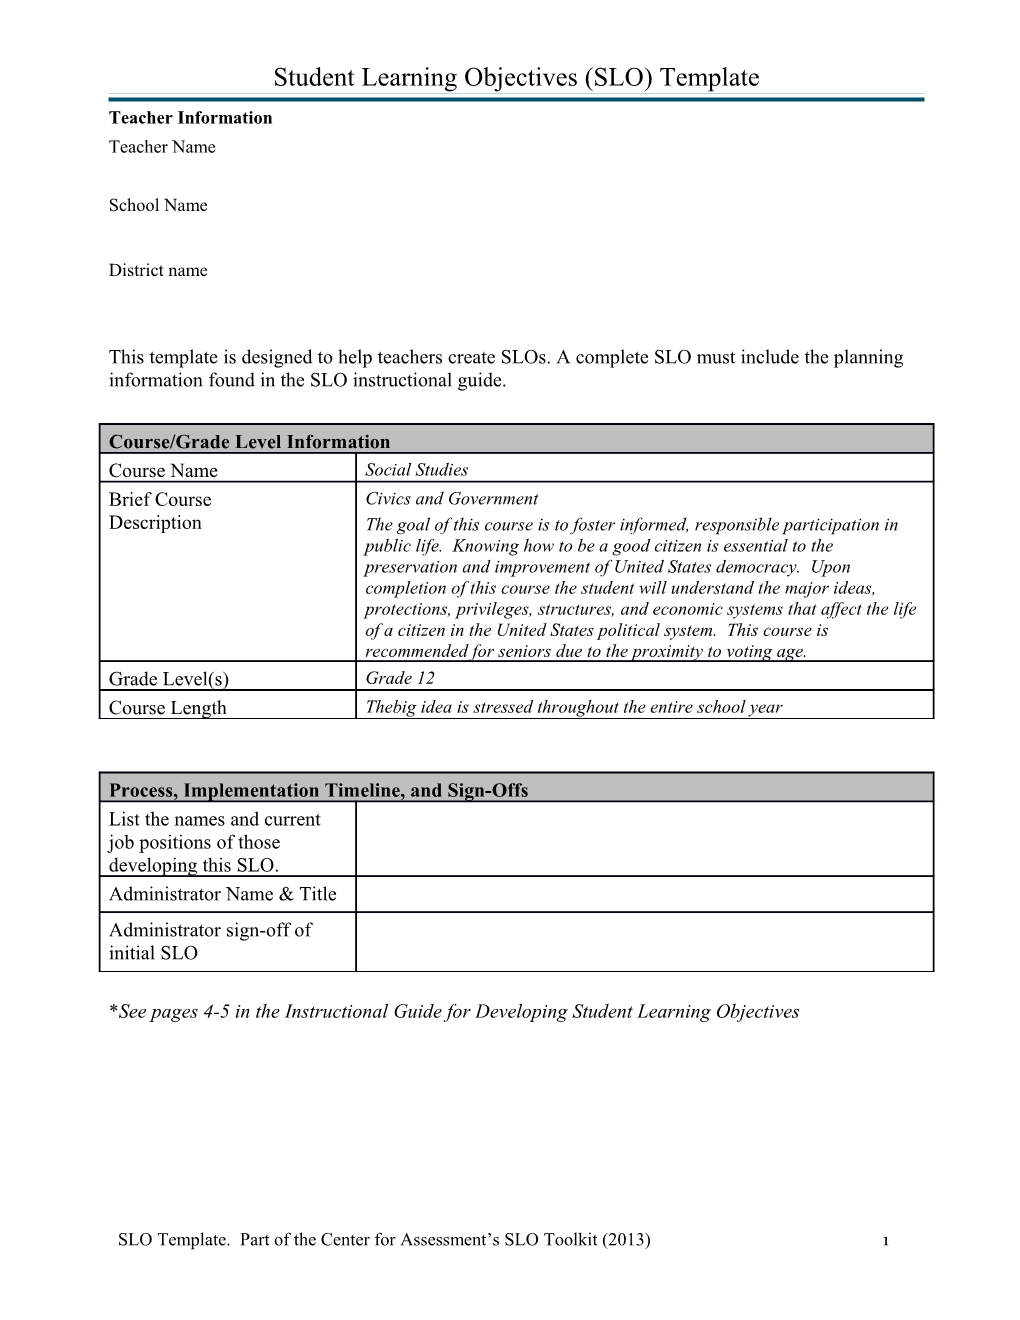 Student Learning Objectives (SLO) Template